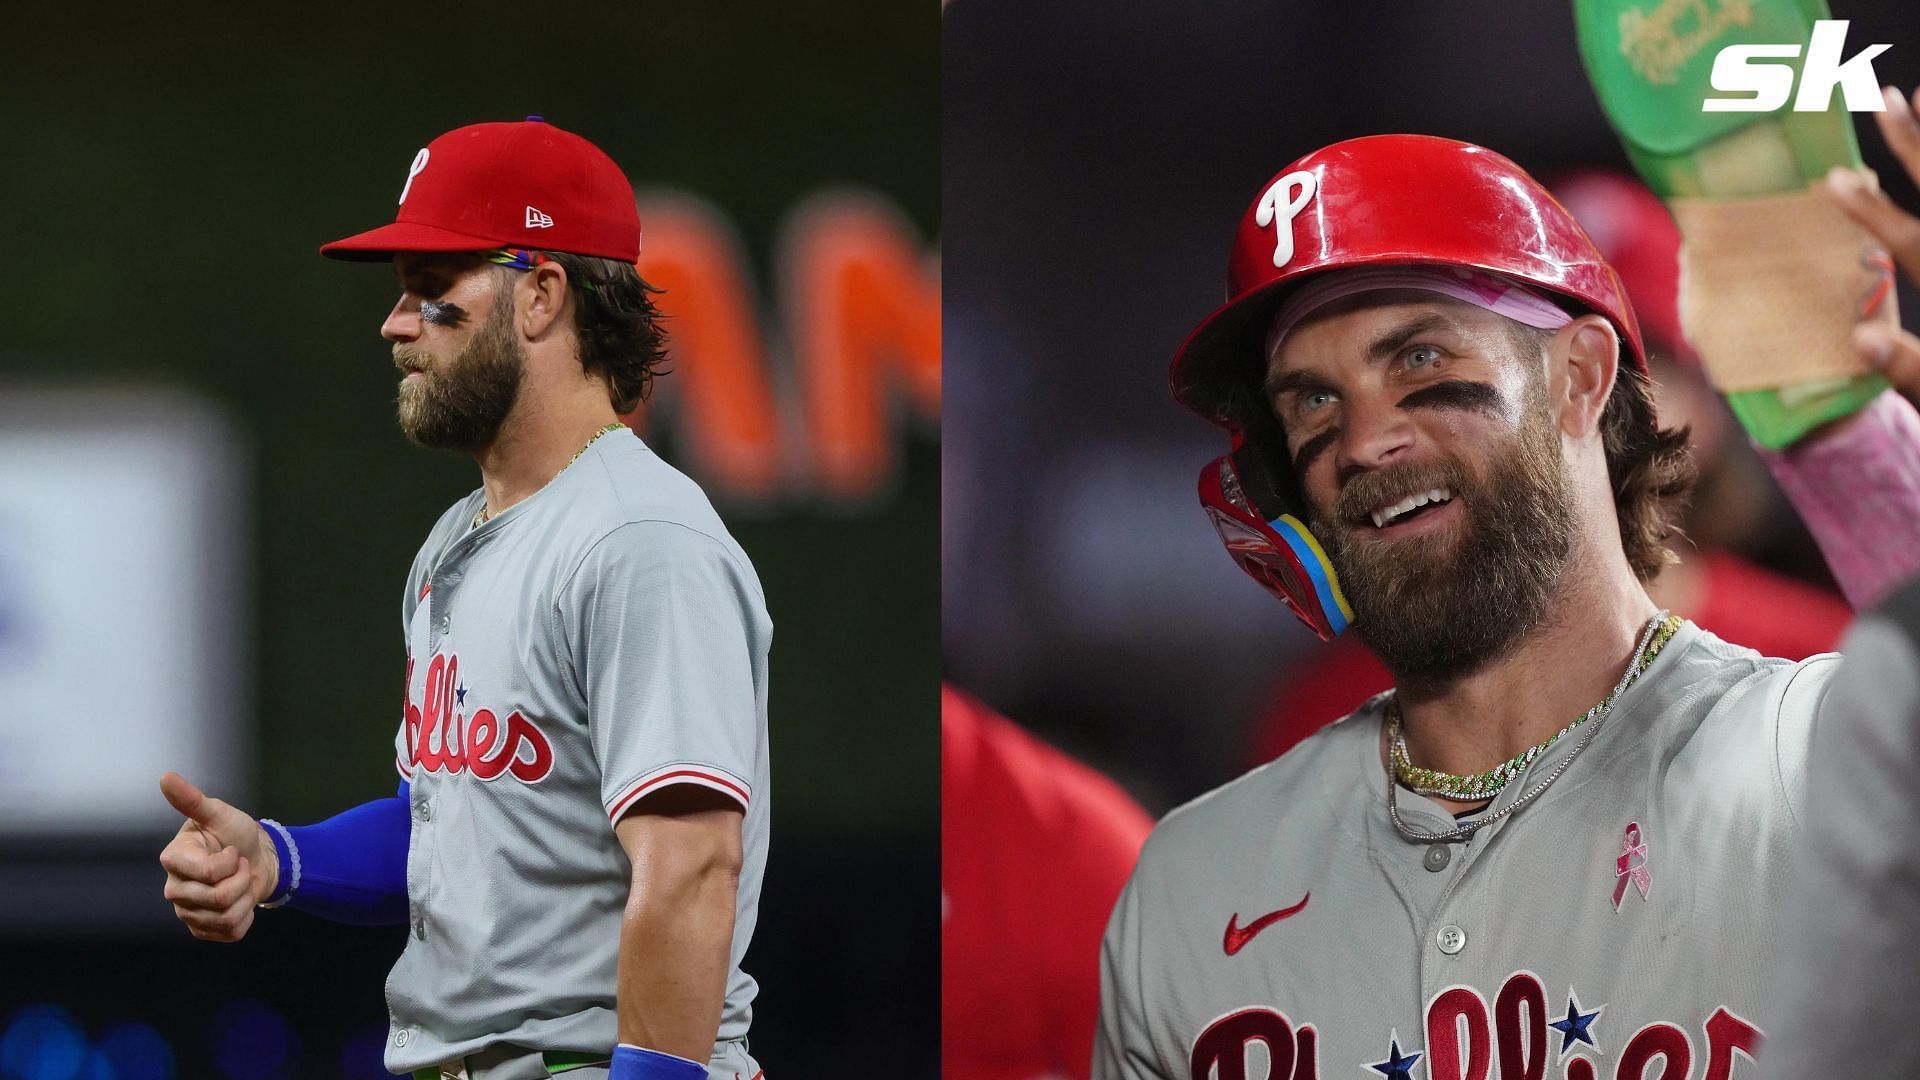 Phillies star Bryce Harper was struck in the side of the helmet by an errant throw from Mets catcher Tomas Nido